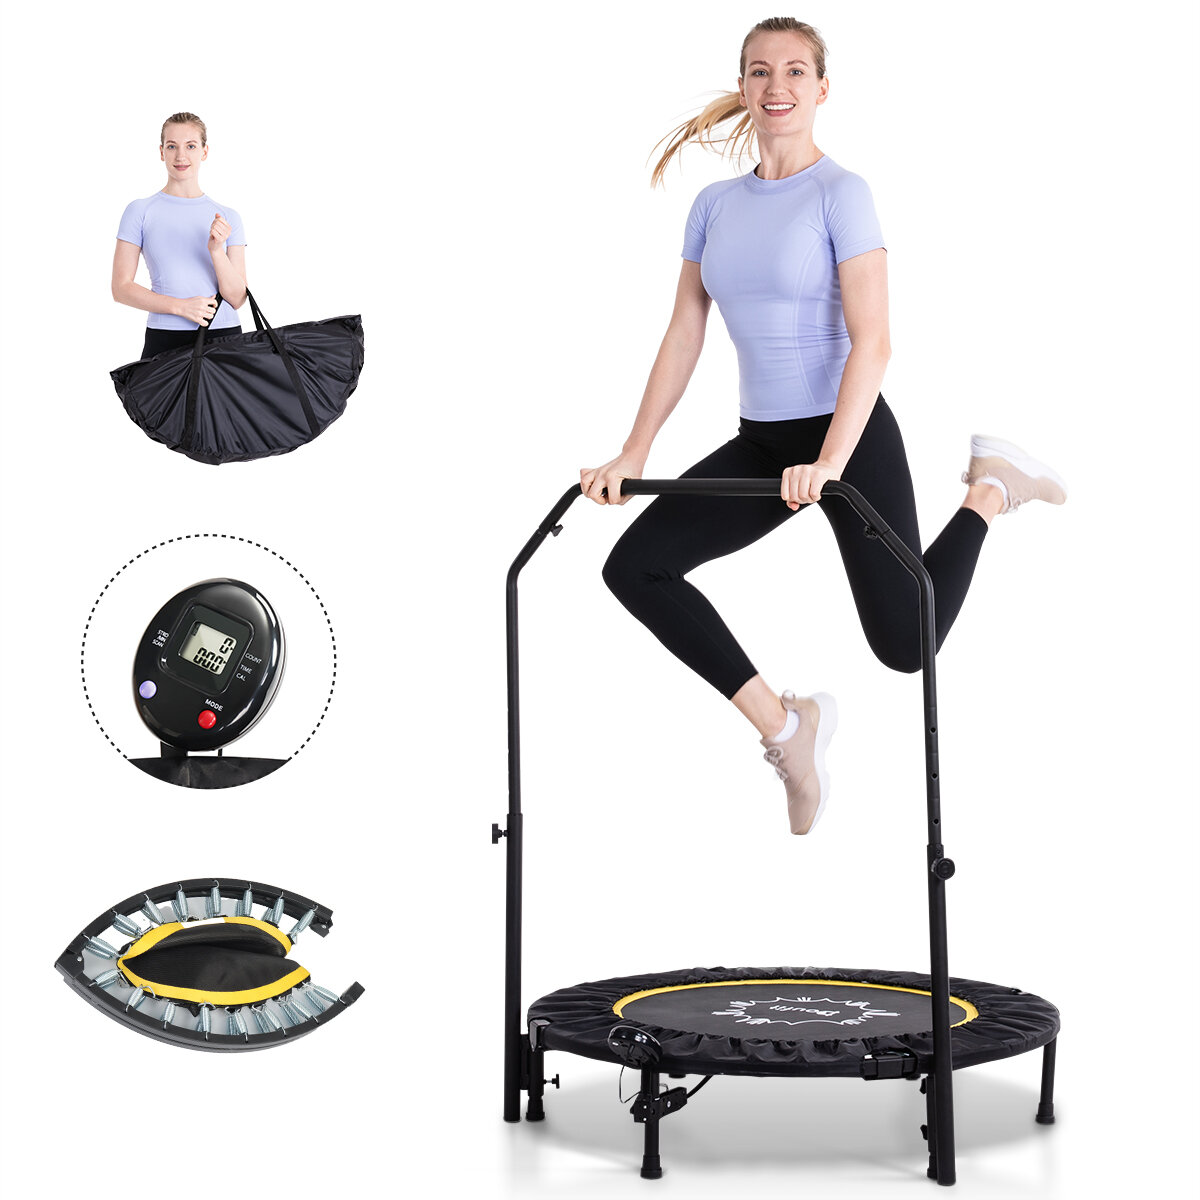 best price,doufit,tr,03,foldable,trampoline,40inch,eu,coupon,price,discount